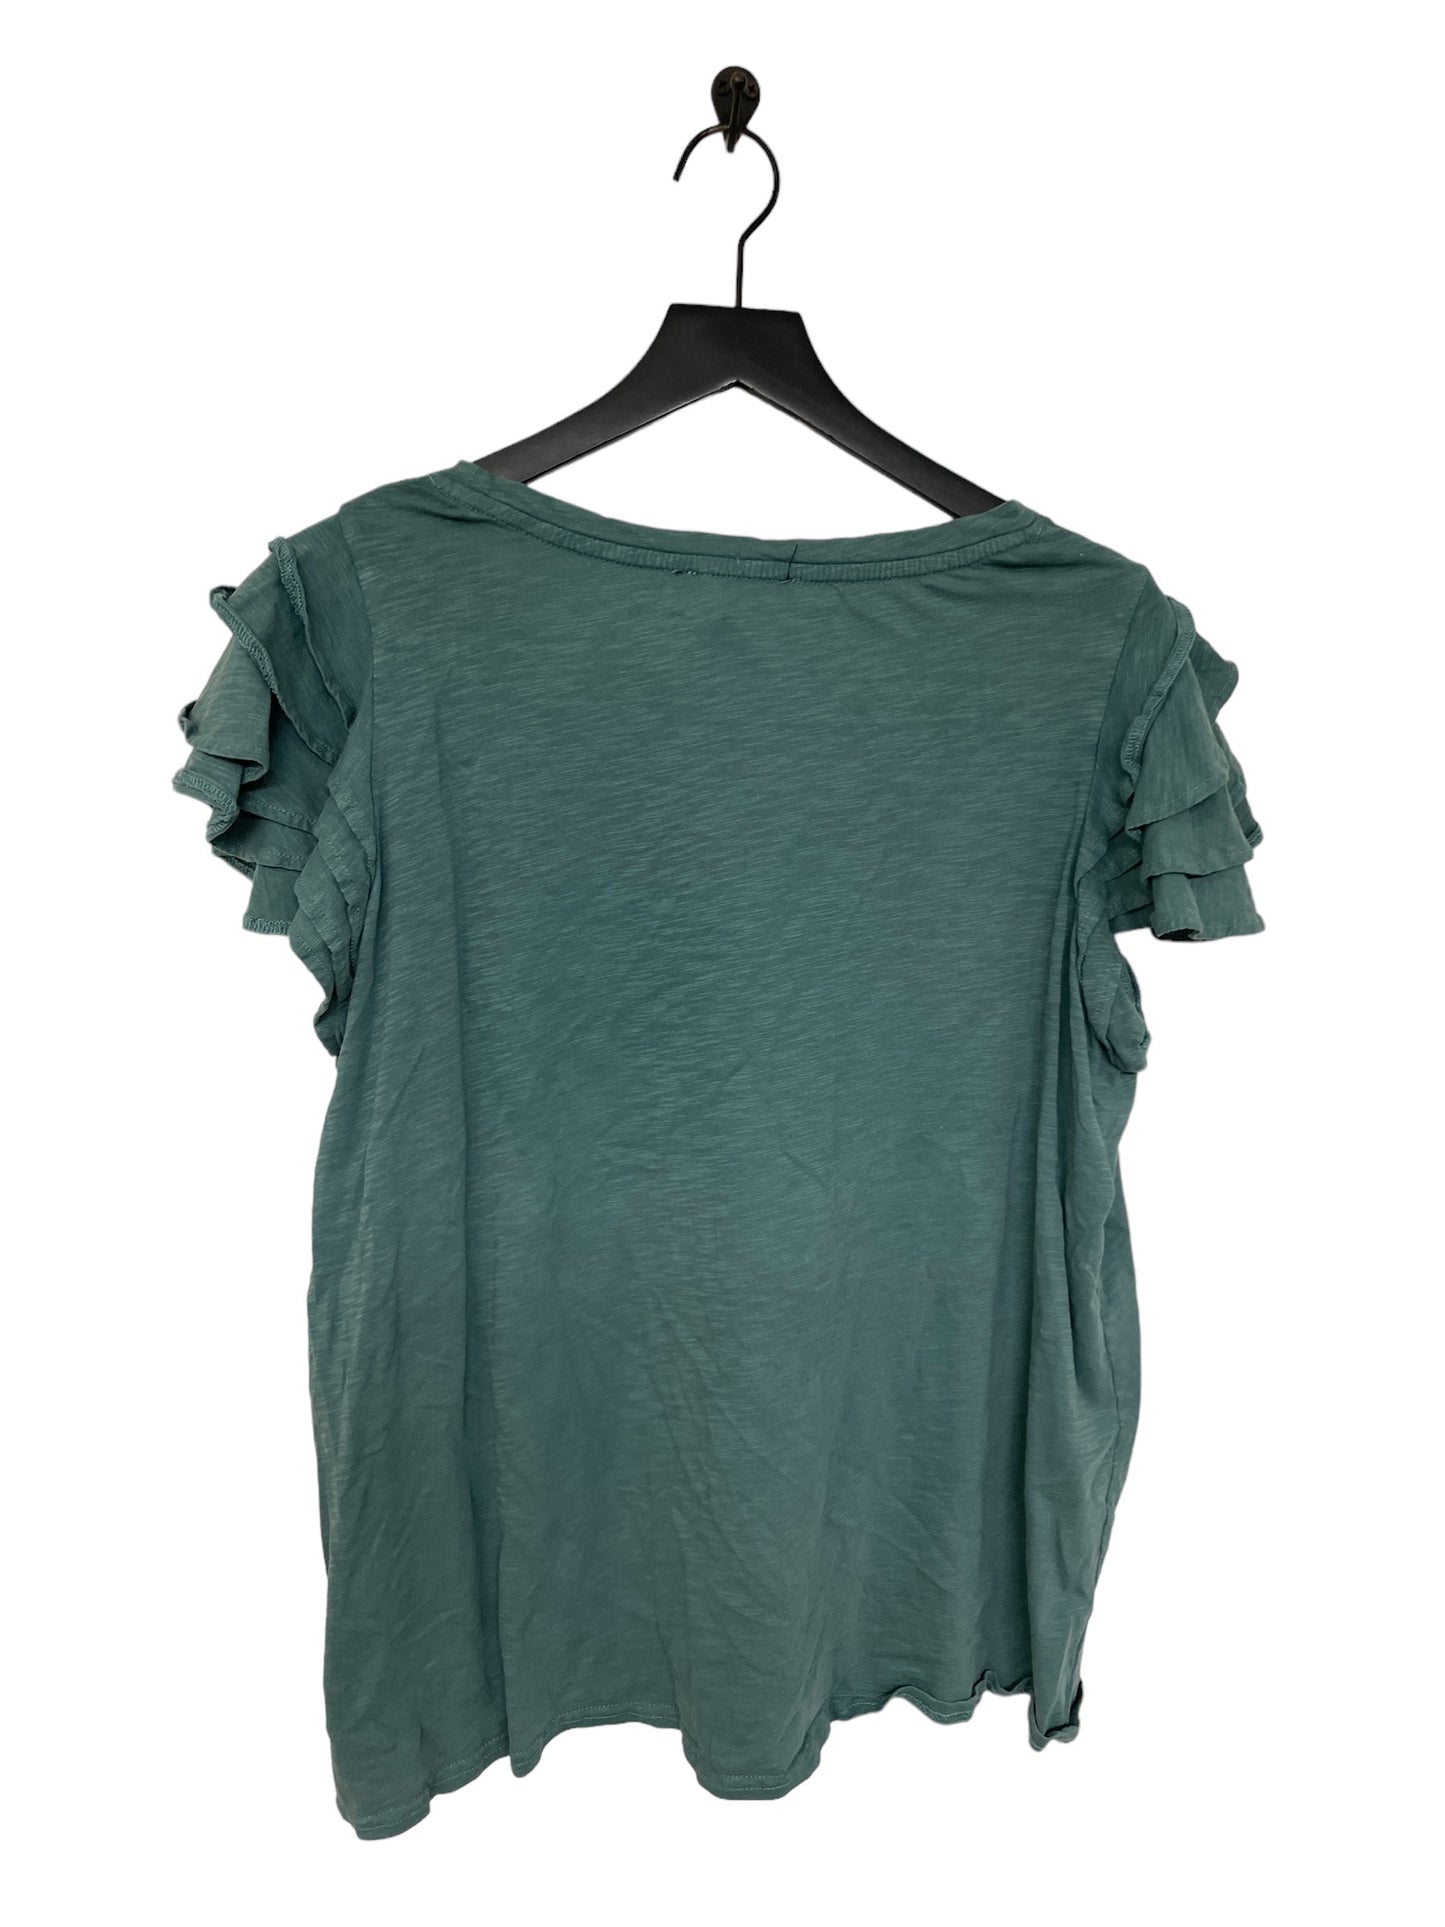 Teal Top Short Sleeve Jane And Delancey, Size 2x